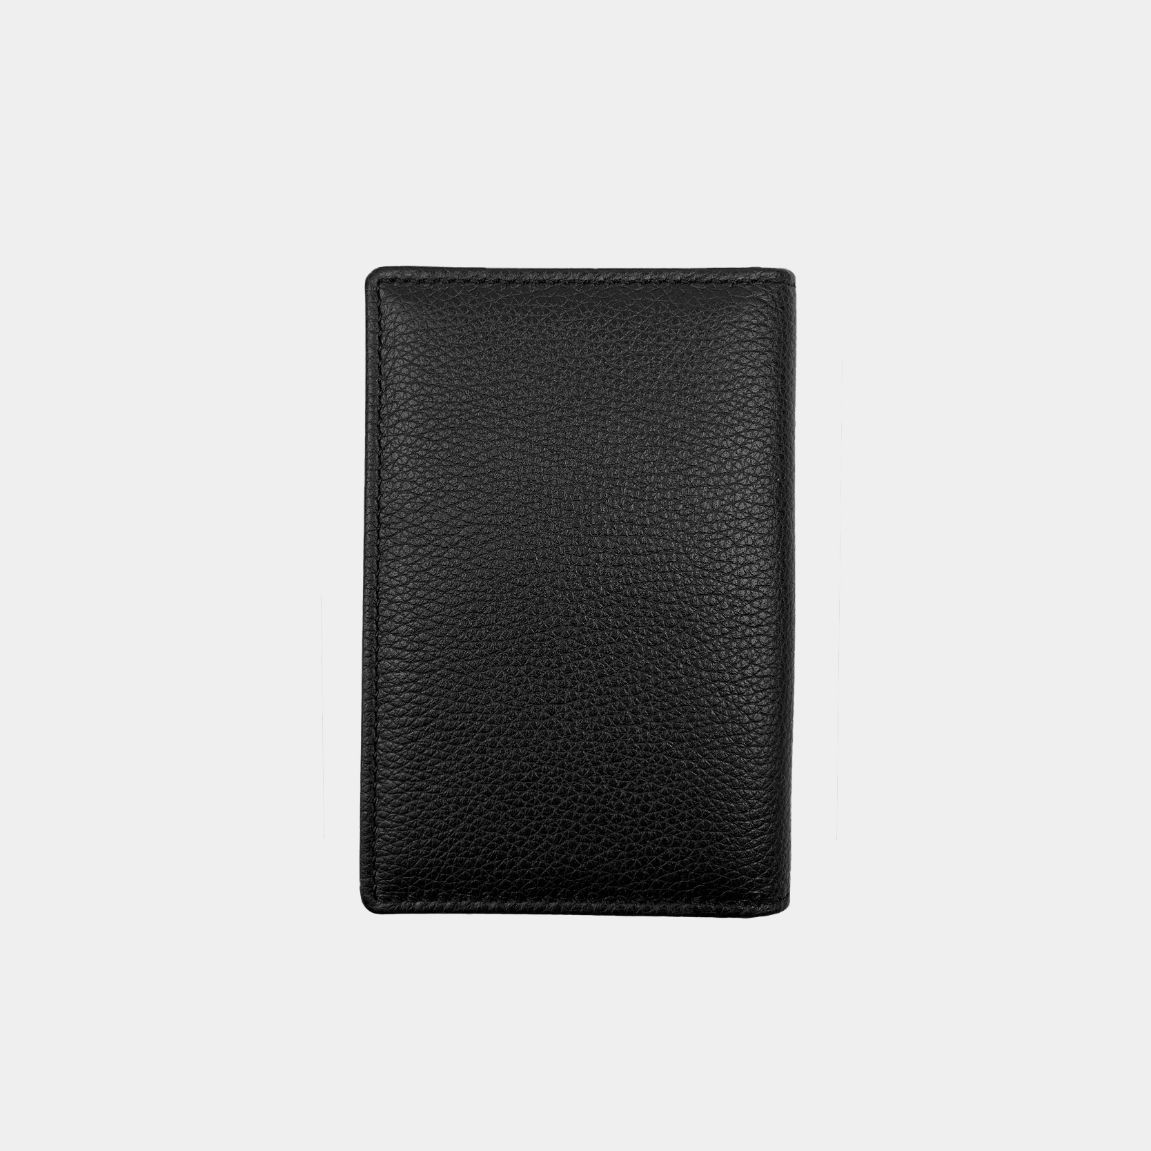 Leather card wallet for all your essential day to day cards. Brand this card wallet with your company logo.